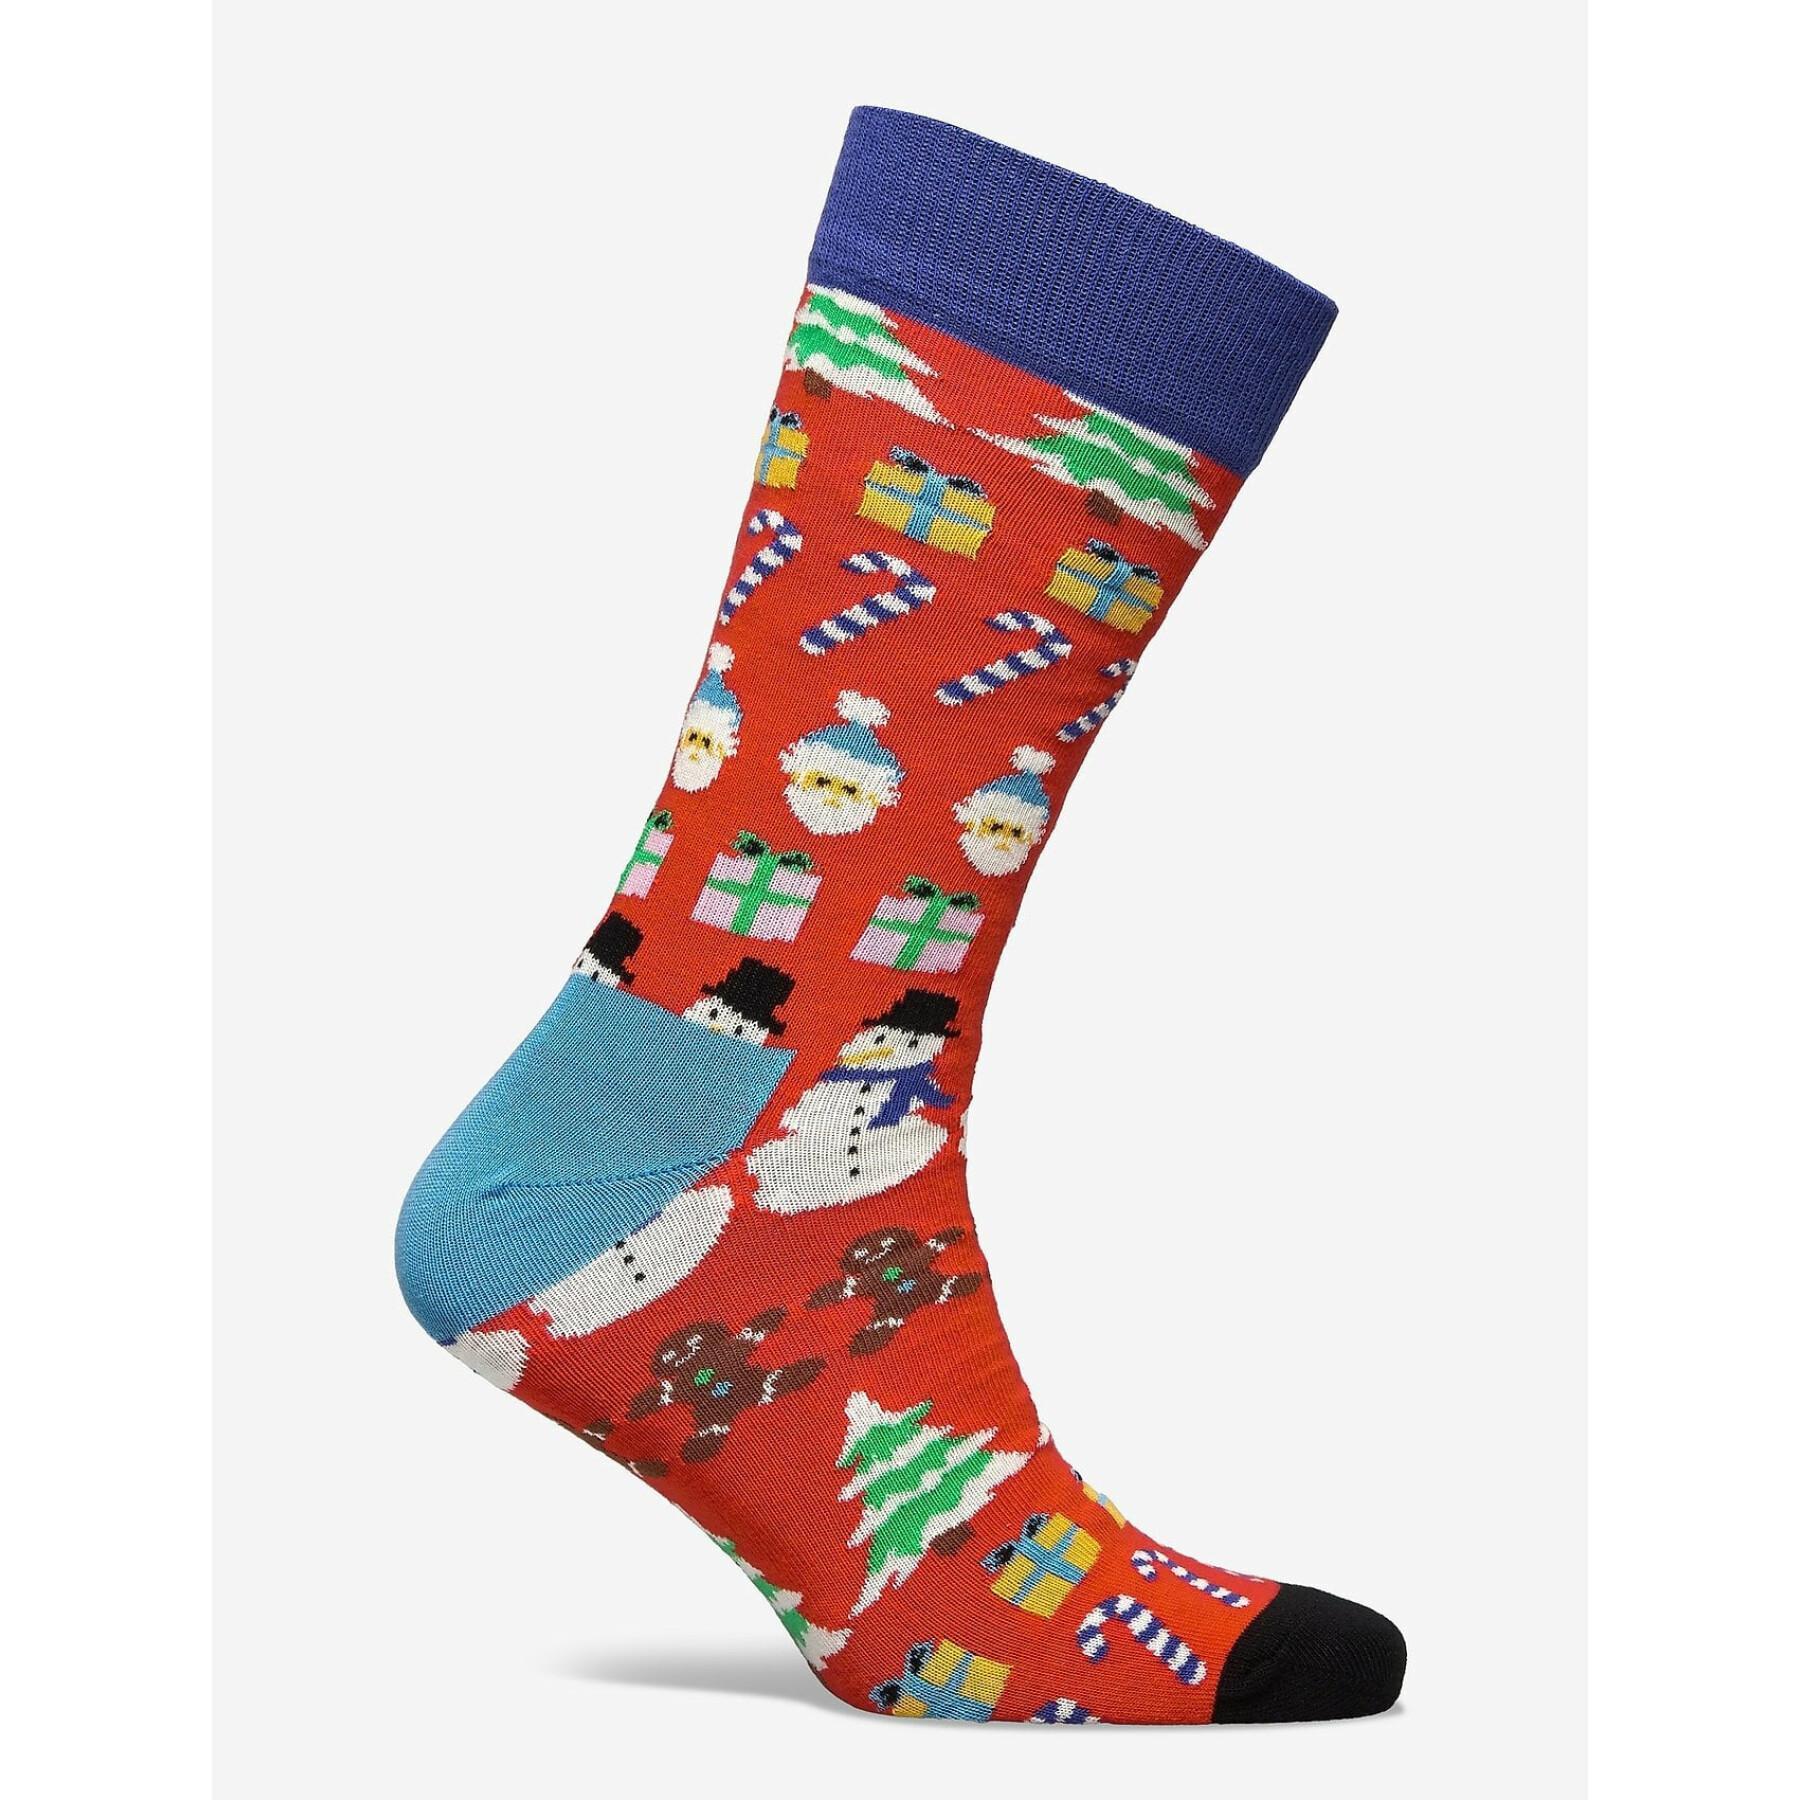 Calcetines Happy socks All i want for chrismas